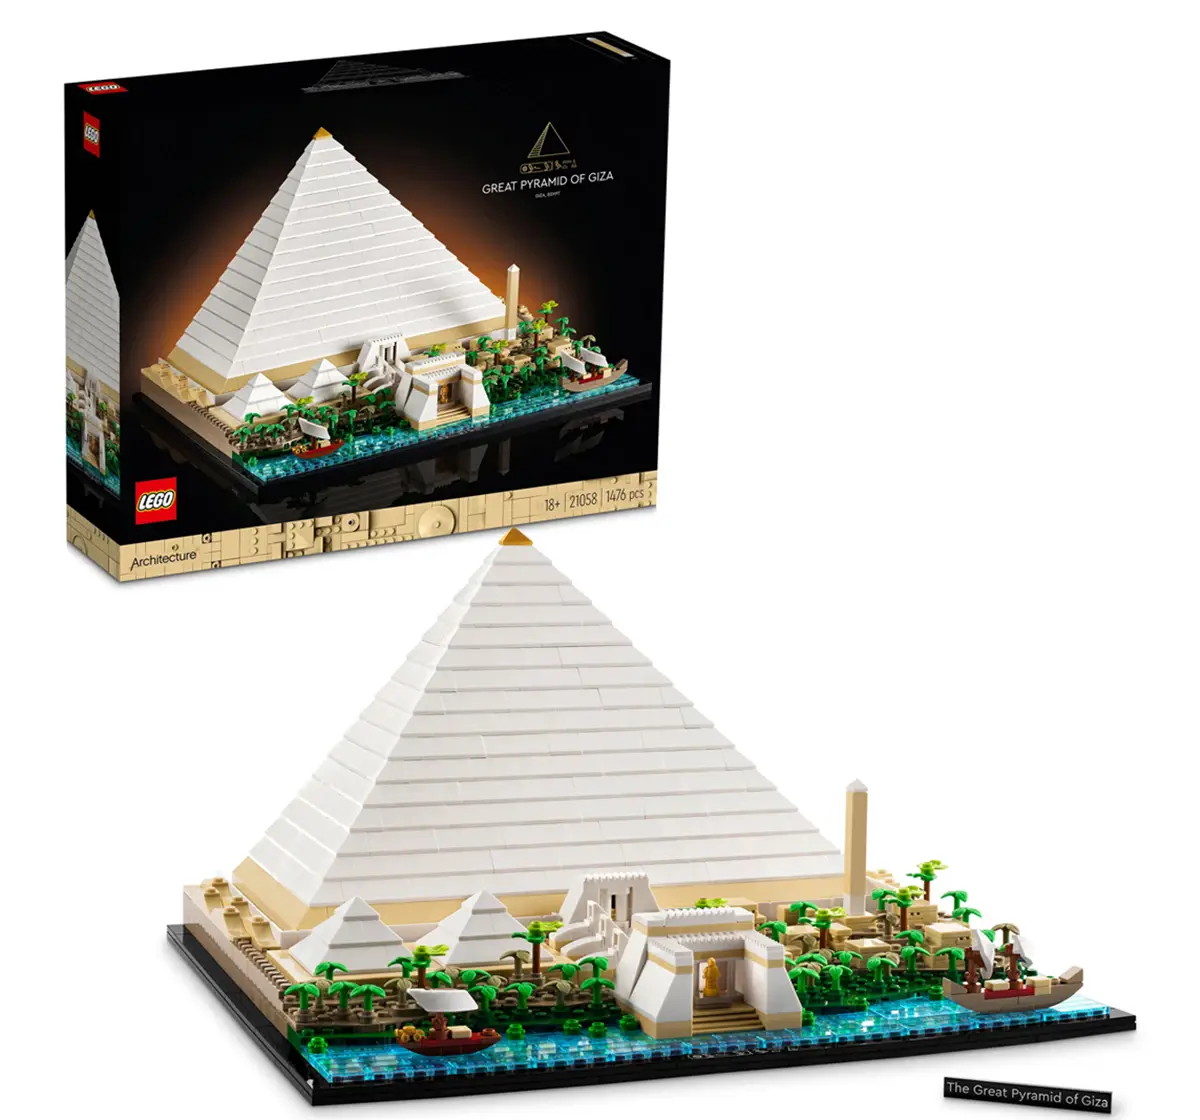 LEGO Architecture Great Pyramid of Giza Building Kit, 1,476 Pieces, Multicolour, 18Y+